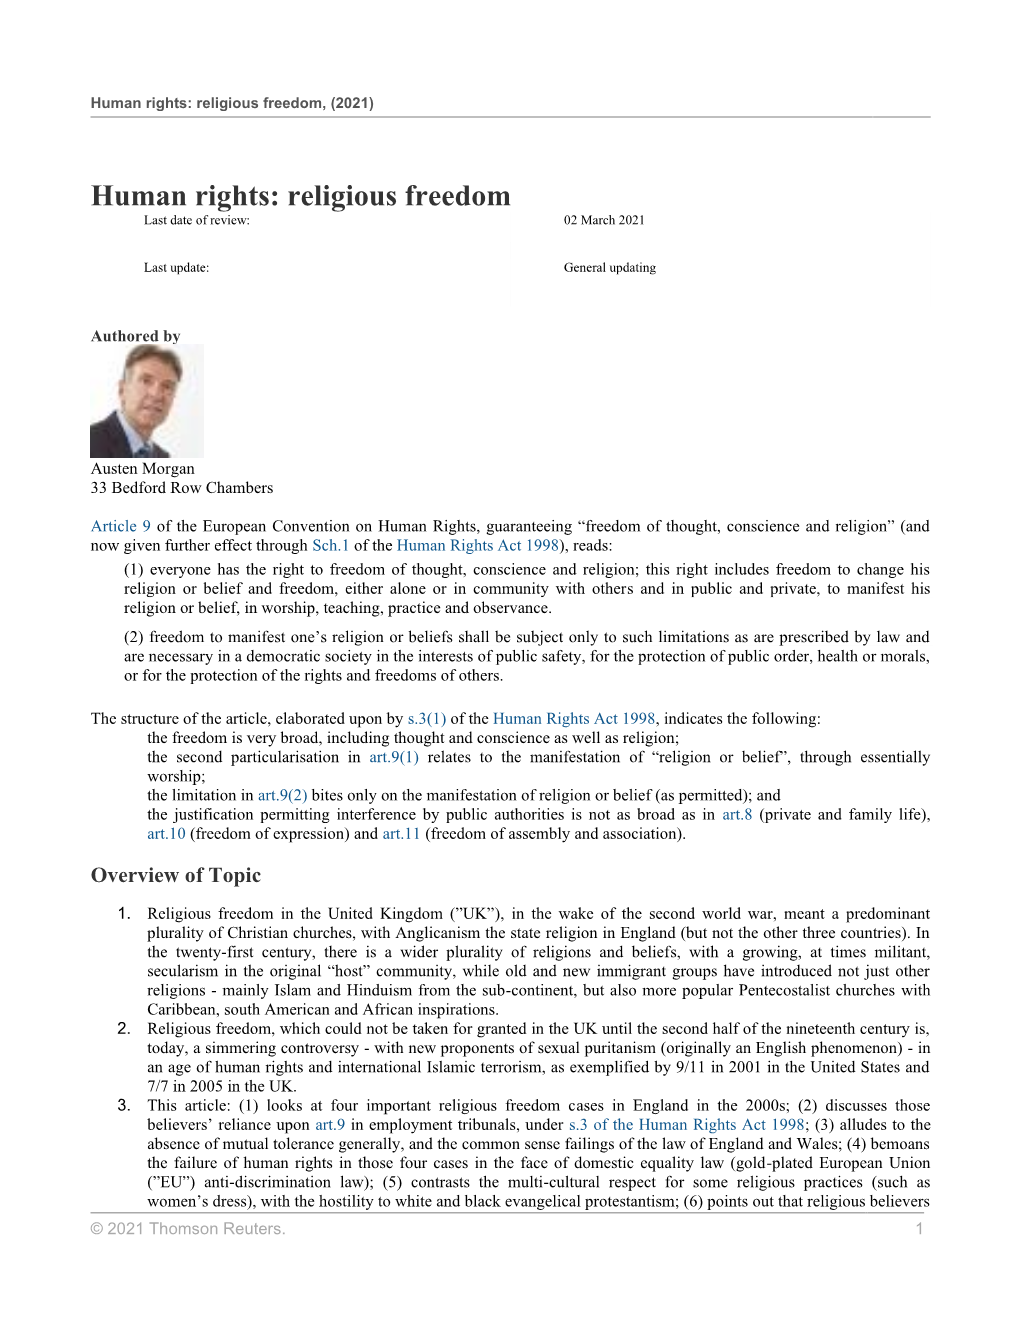 Human Rights: Religious Freedom, (2021)